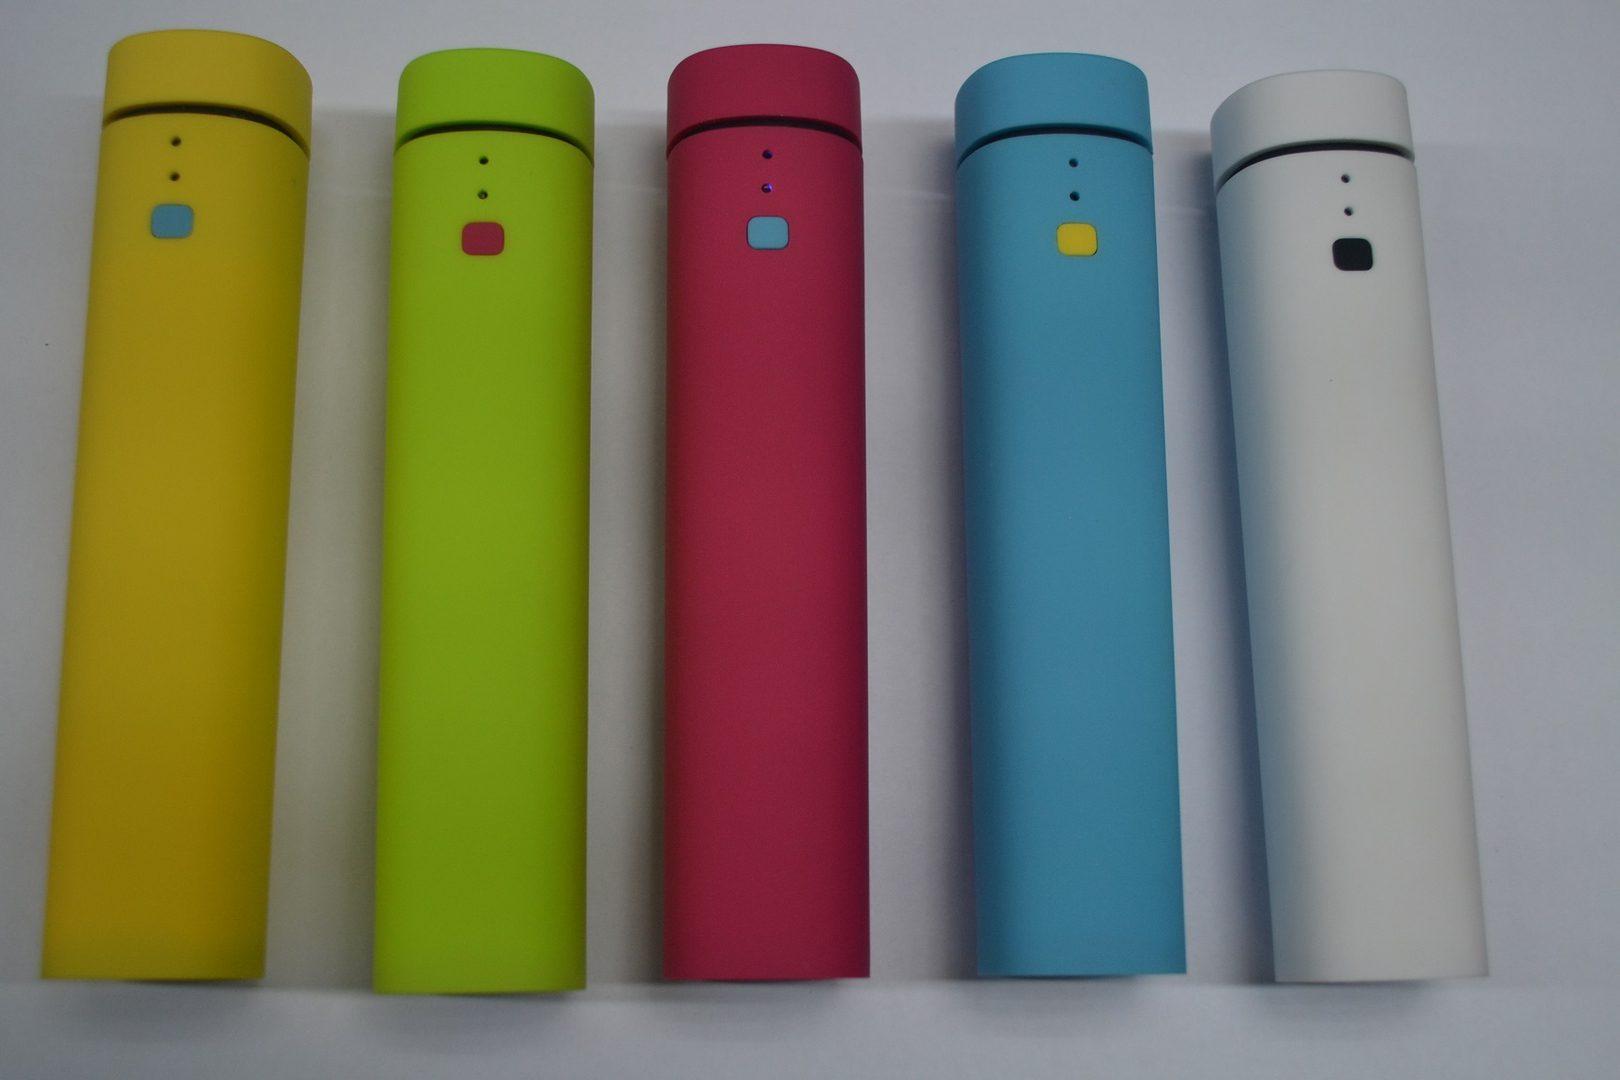 Power Banks Lined Up in Five Different Colors